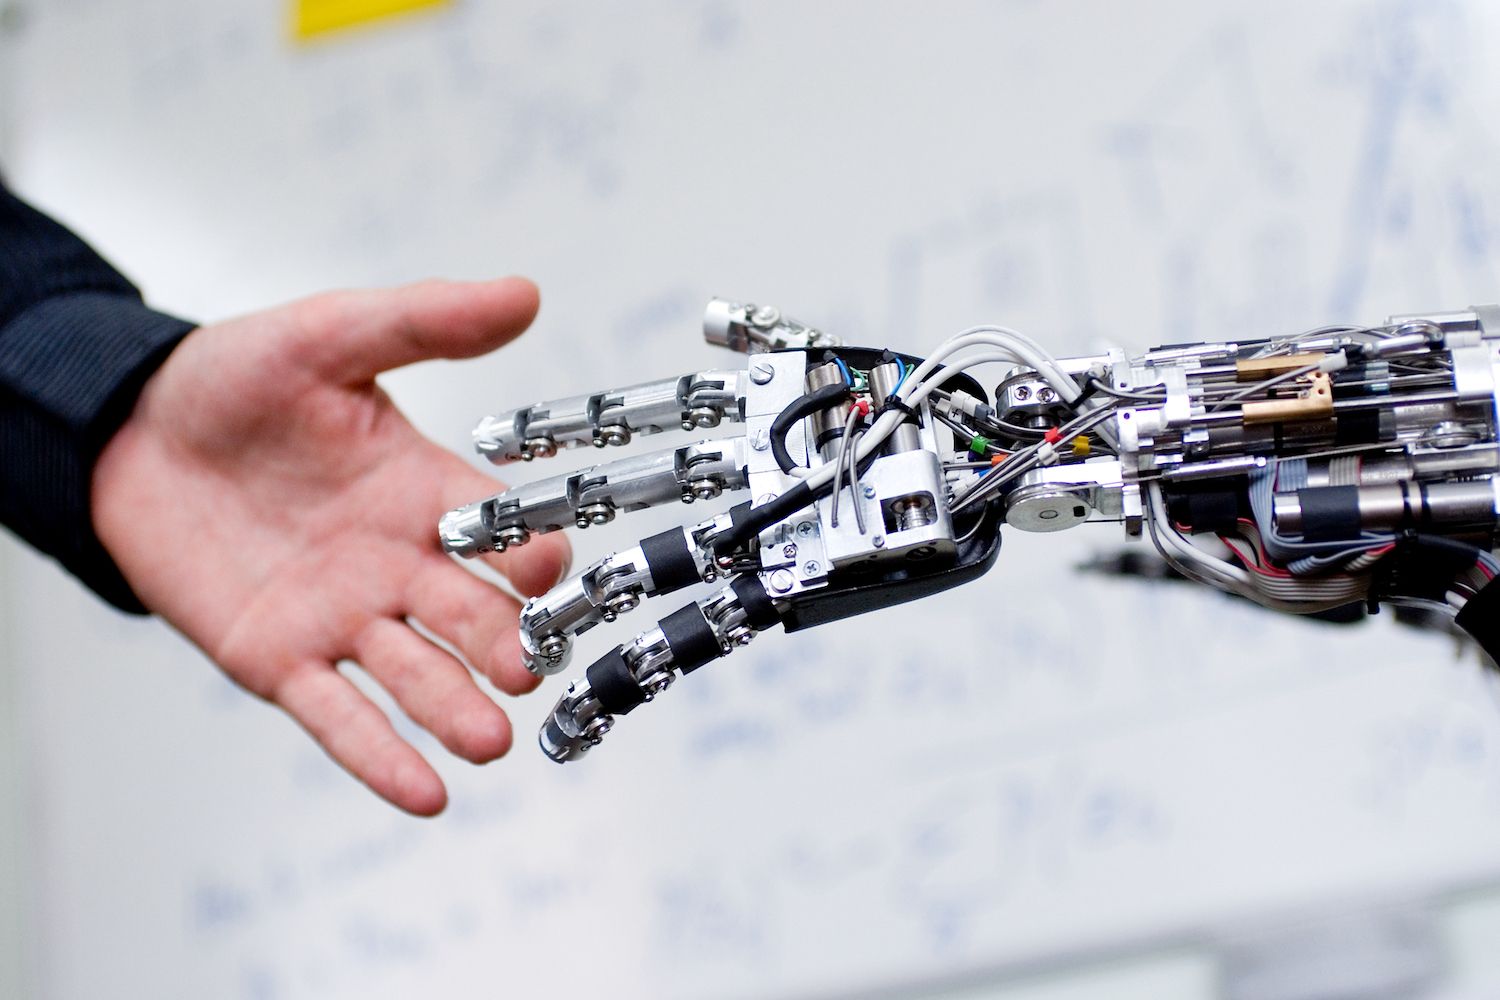 Experimental robotic hand shaking hands with staff